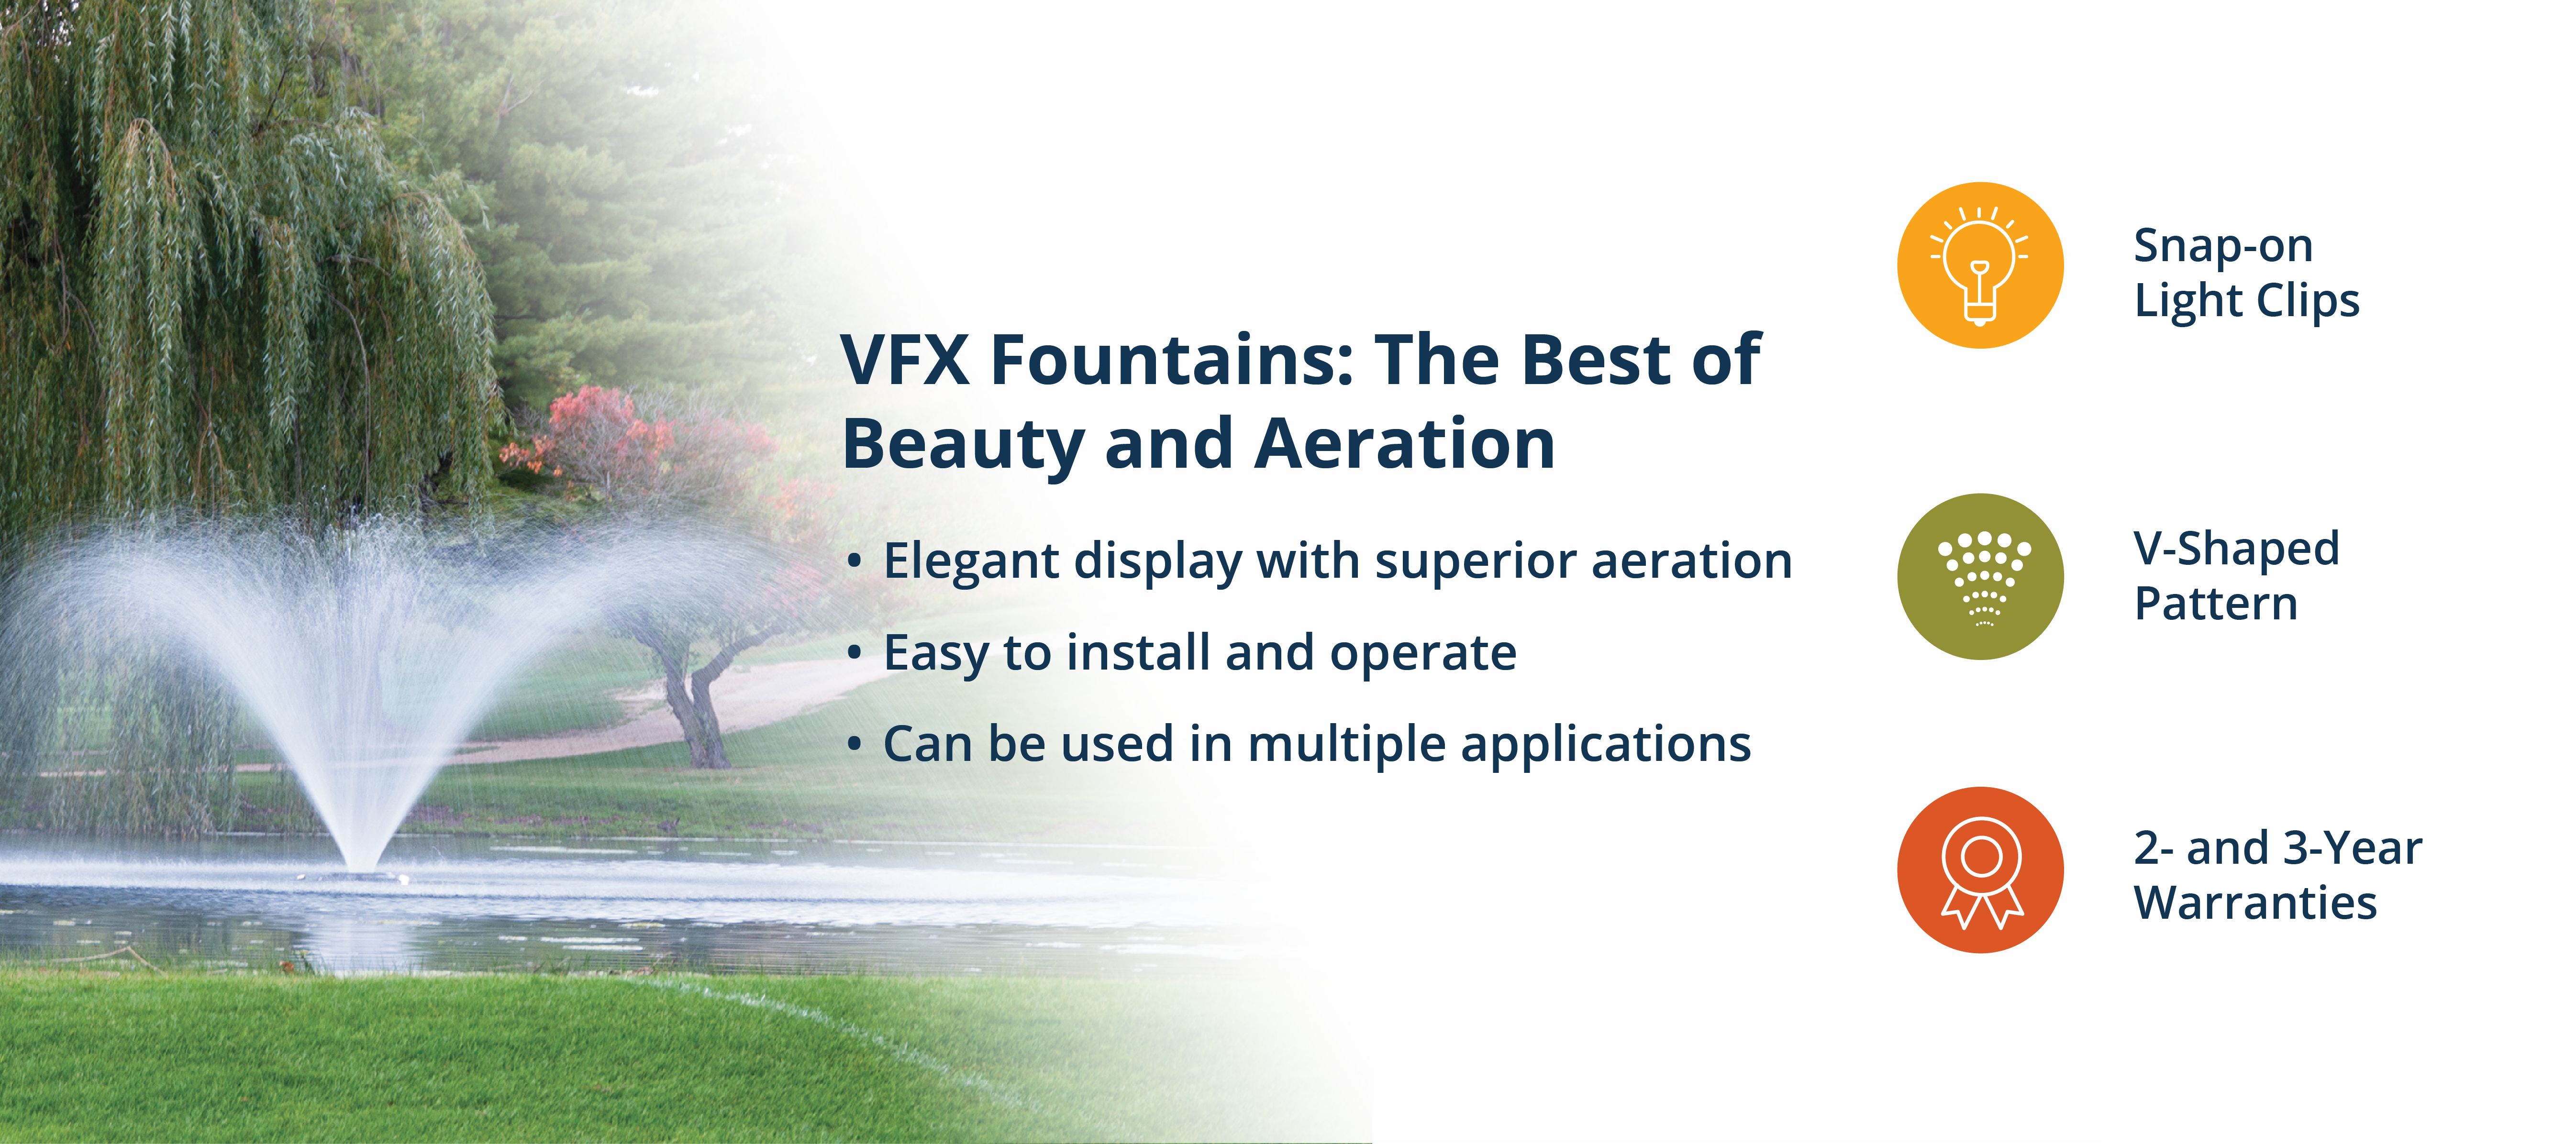 VFX Fountains Features and Benefits